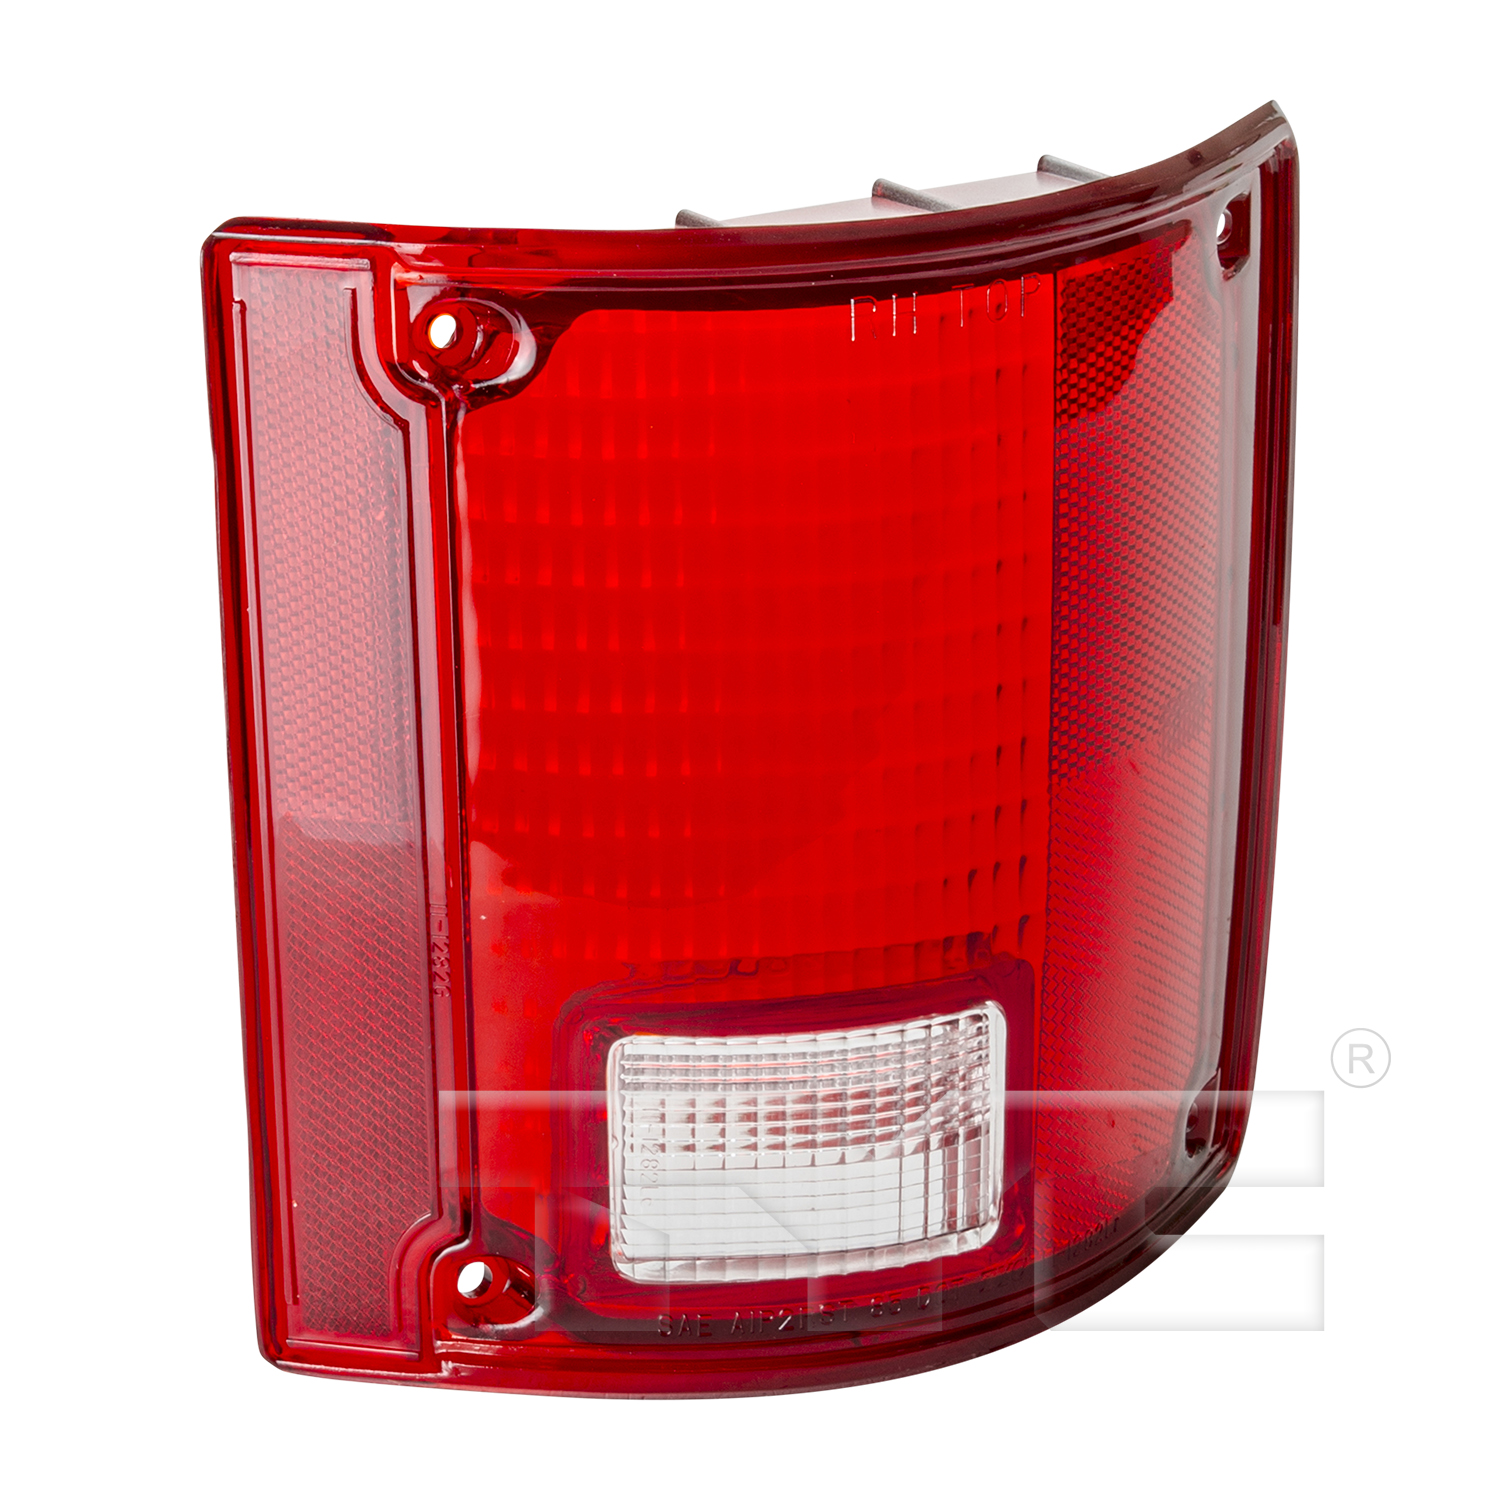 Aftermarket TAILLIGHTS for CHEVROLET - C20, C20,75-86,RT Taillamp lens